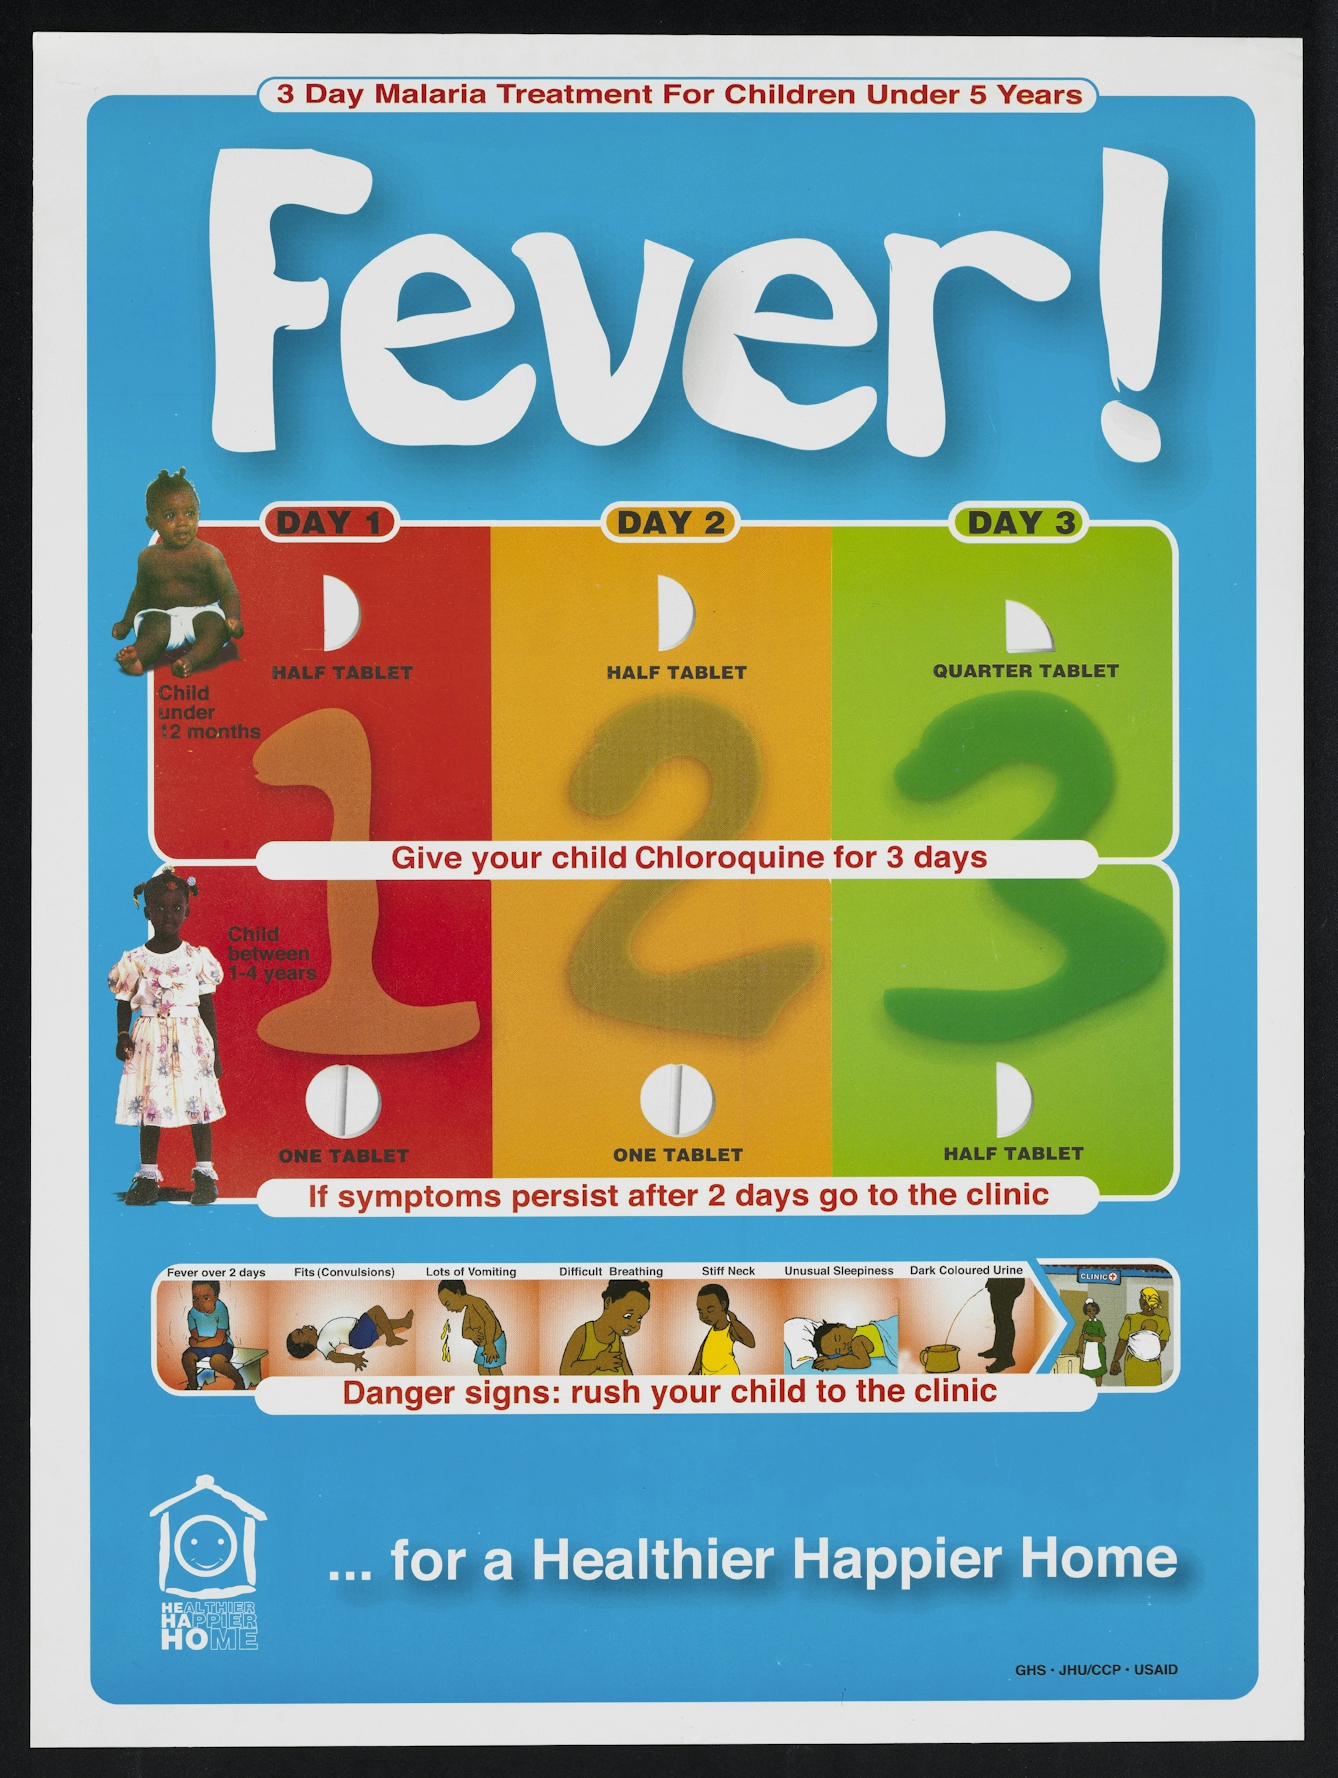 Colourful public health poster with lettering '3 Day Malaria Treatment for Children Under 5 Years' and the word 'Fever! in large letters. Graphics and images of young Ghanaian children and a strip cartoon giving advice for yow to treat malaria with chloroquine over three days.